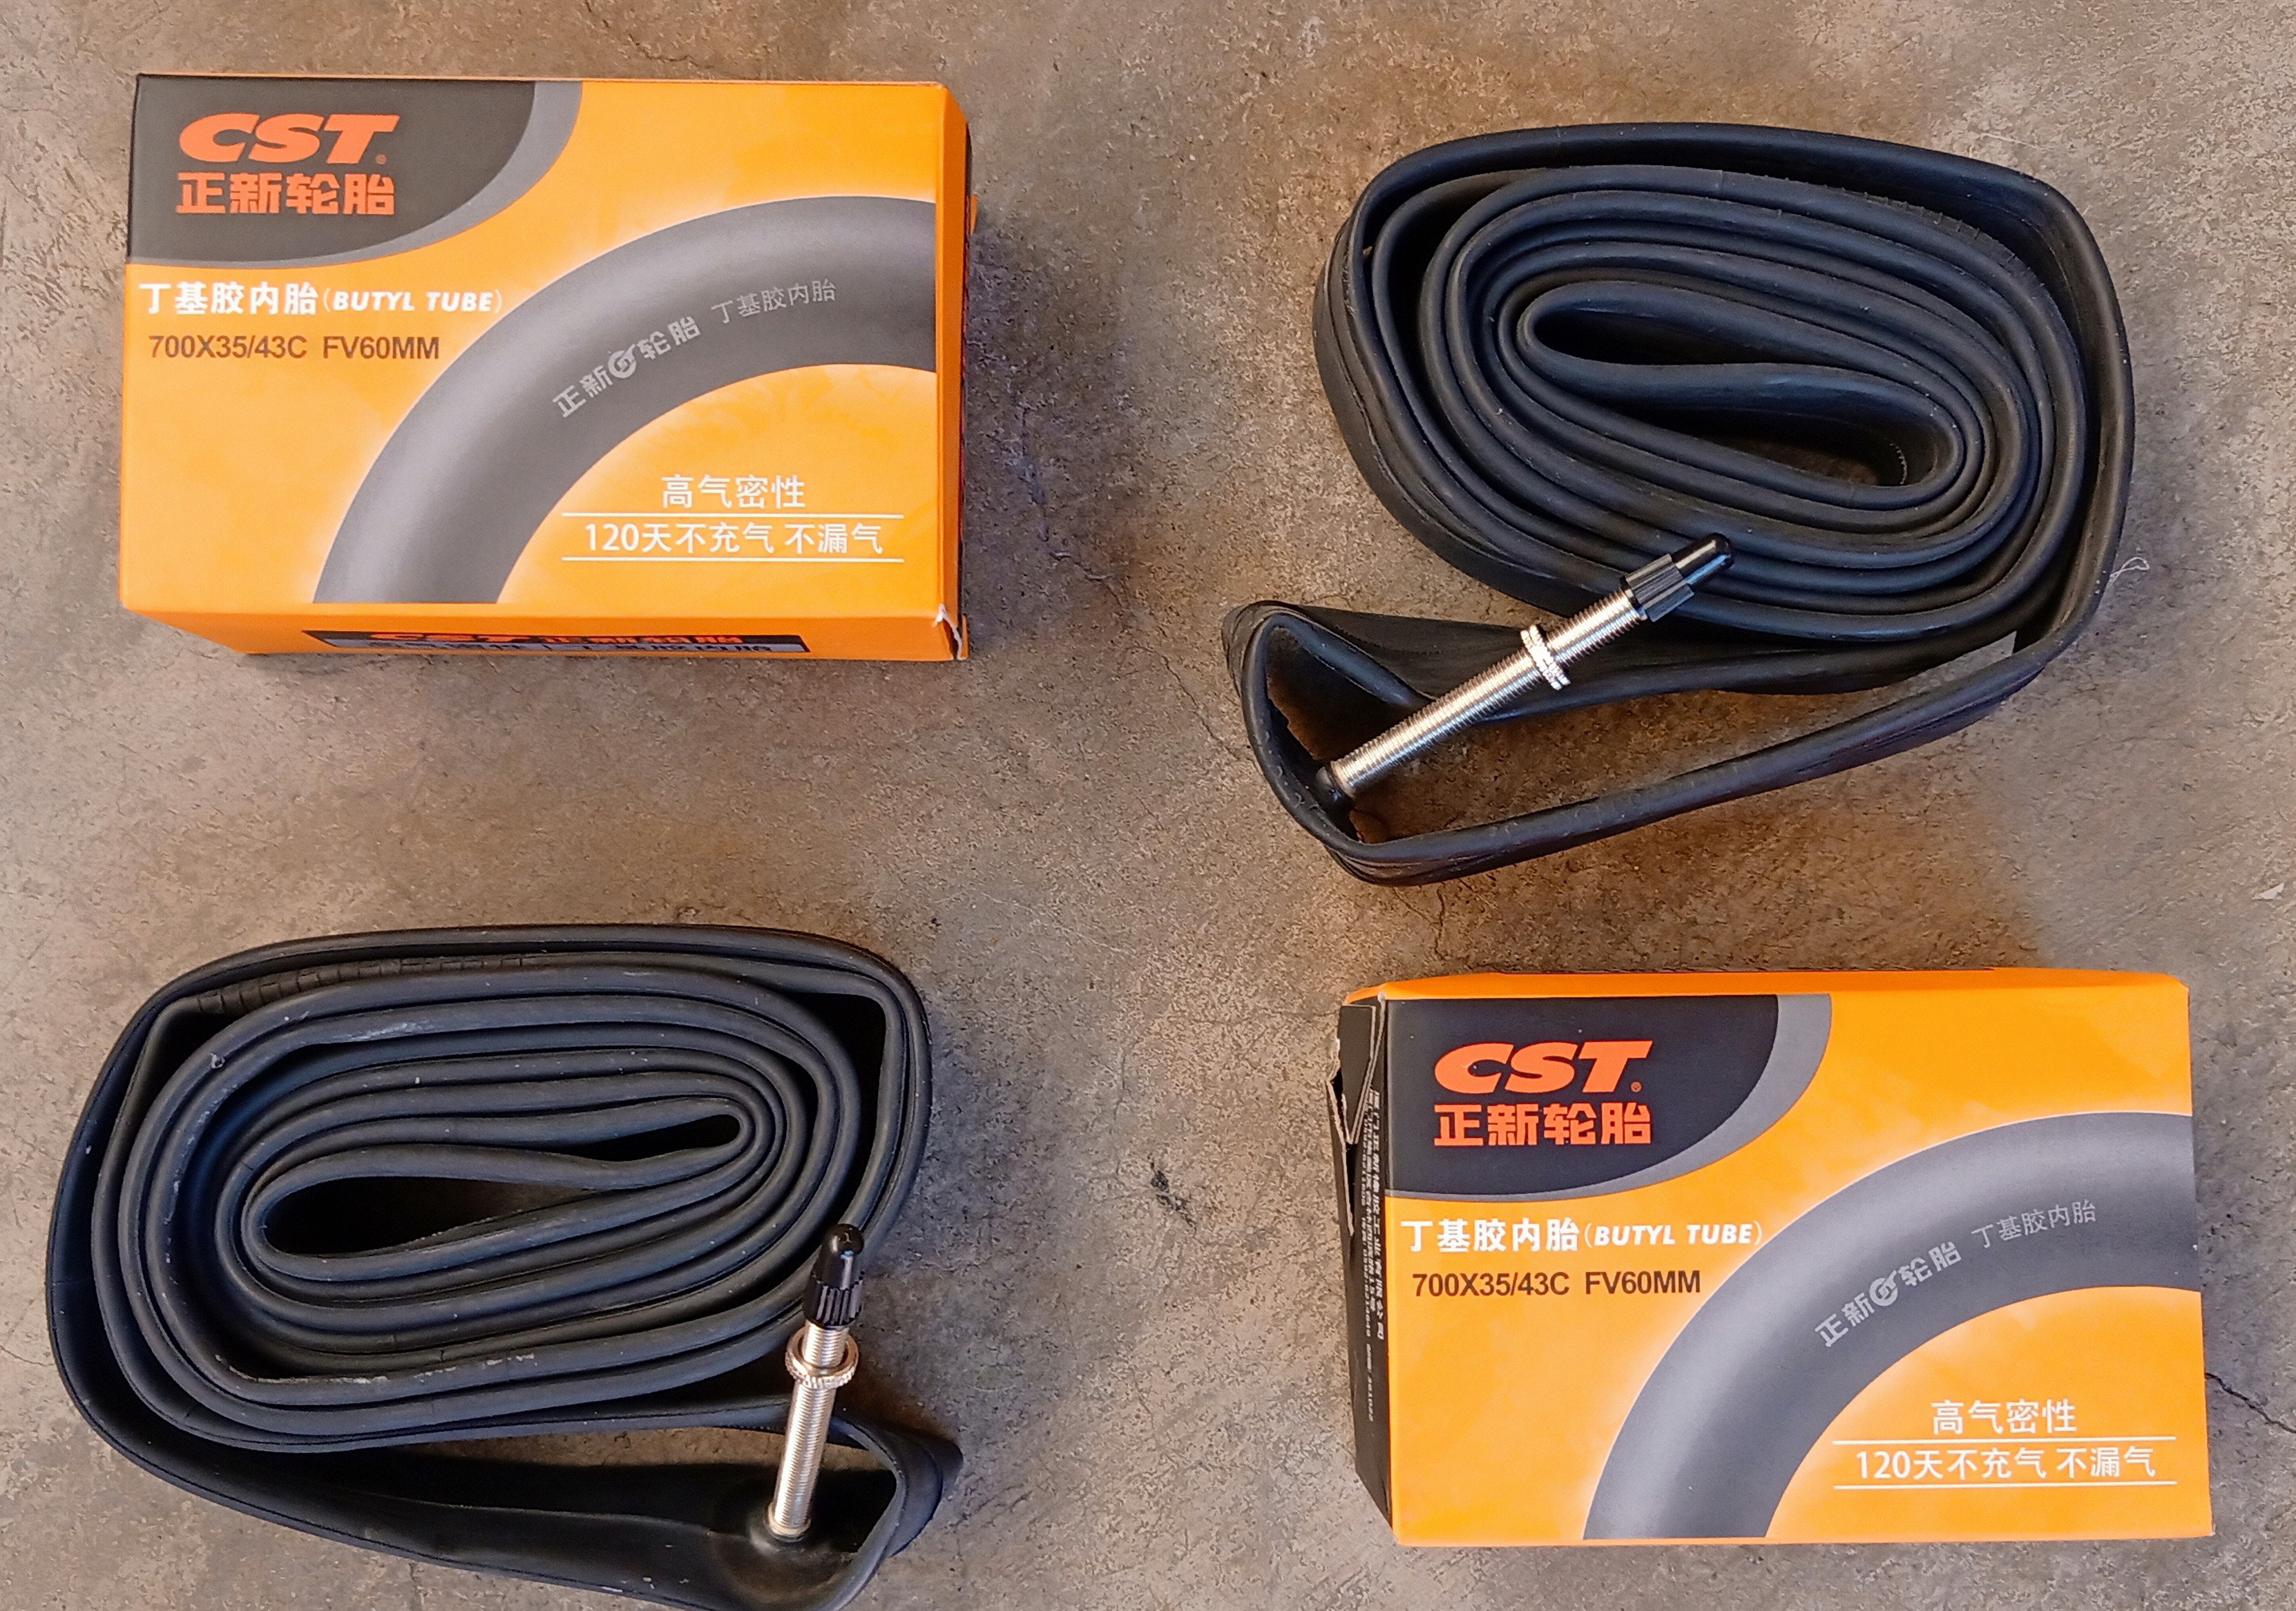 Details about   2-6 tube Maxxis Welter Weight 700x23-32C 60mm FV Bicycle  Inner Tube Presta 